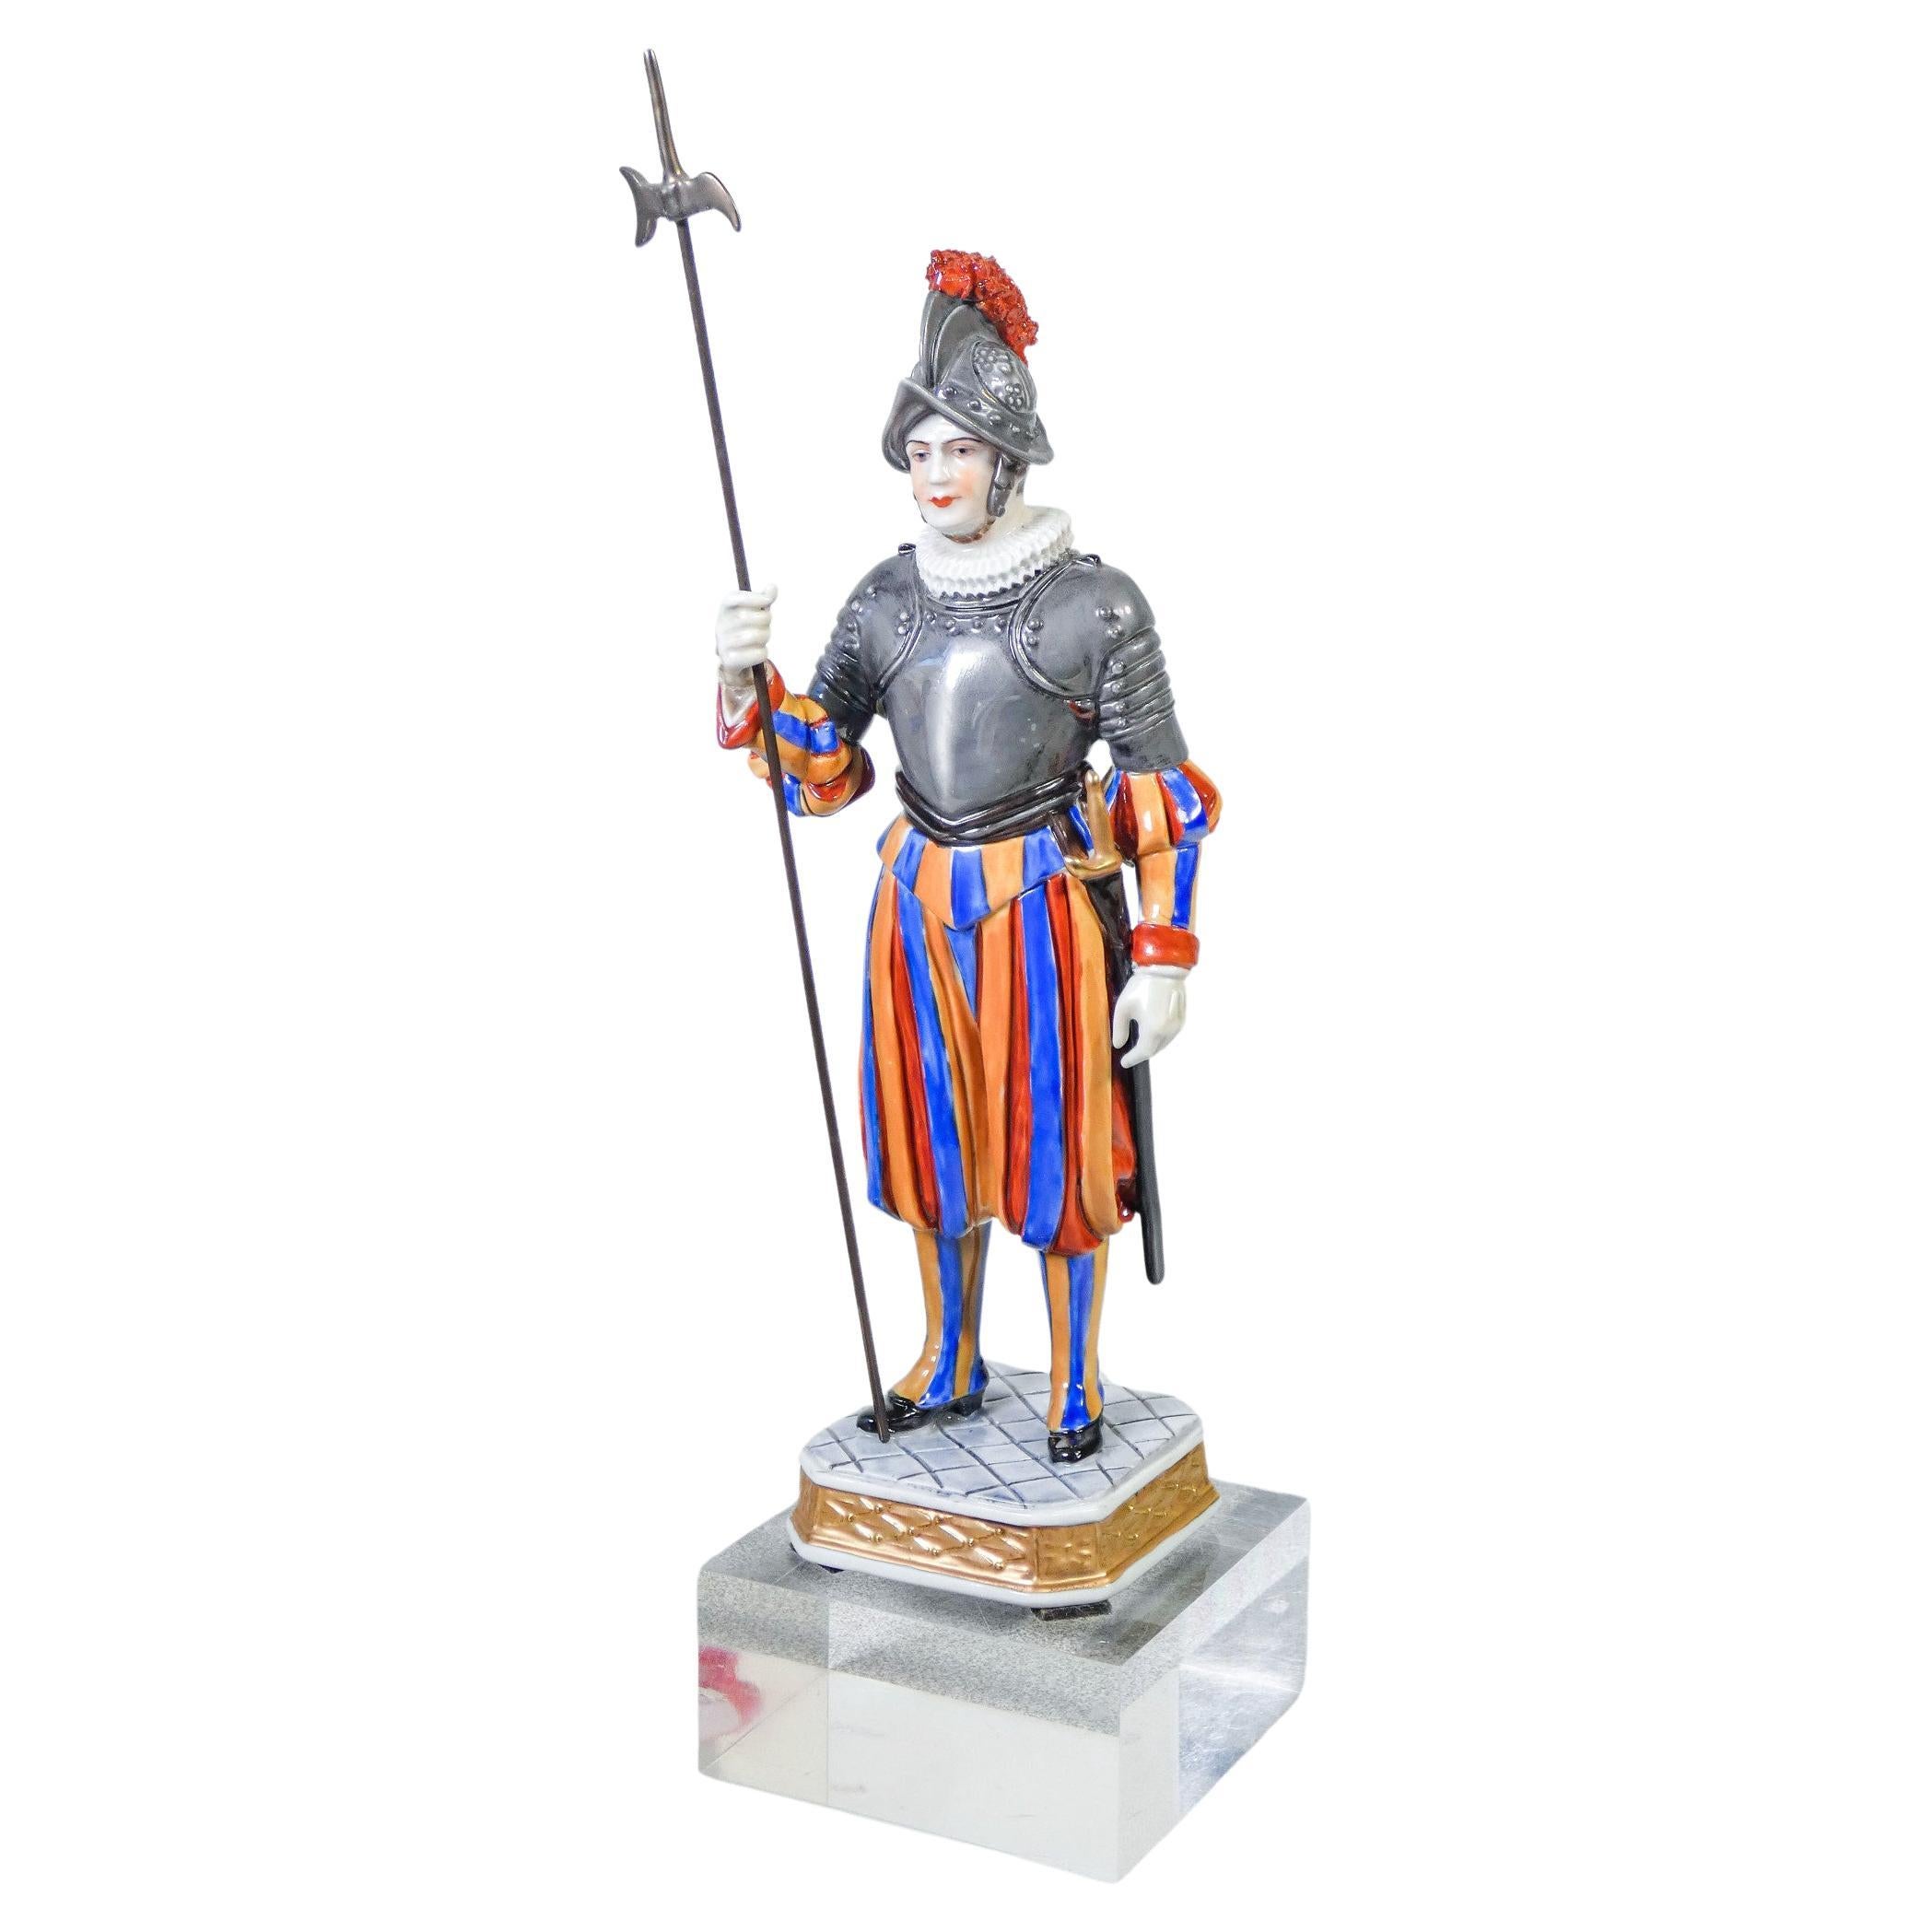 Porcelain Figurine Aelteste Volkstedt, Pontifical Swiss Guard, Early 20th C